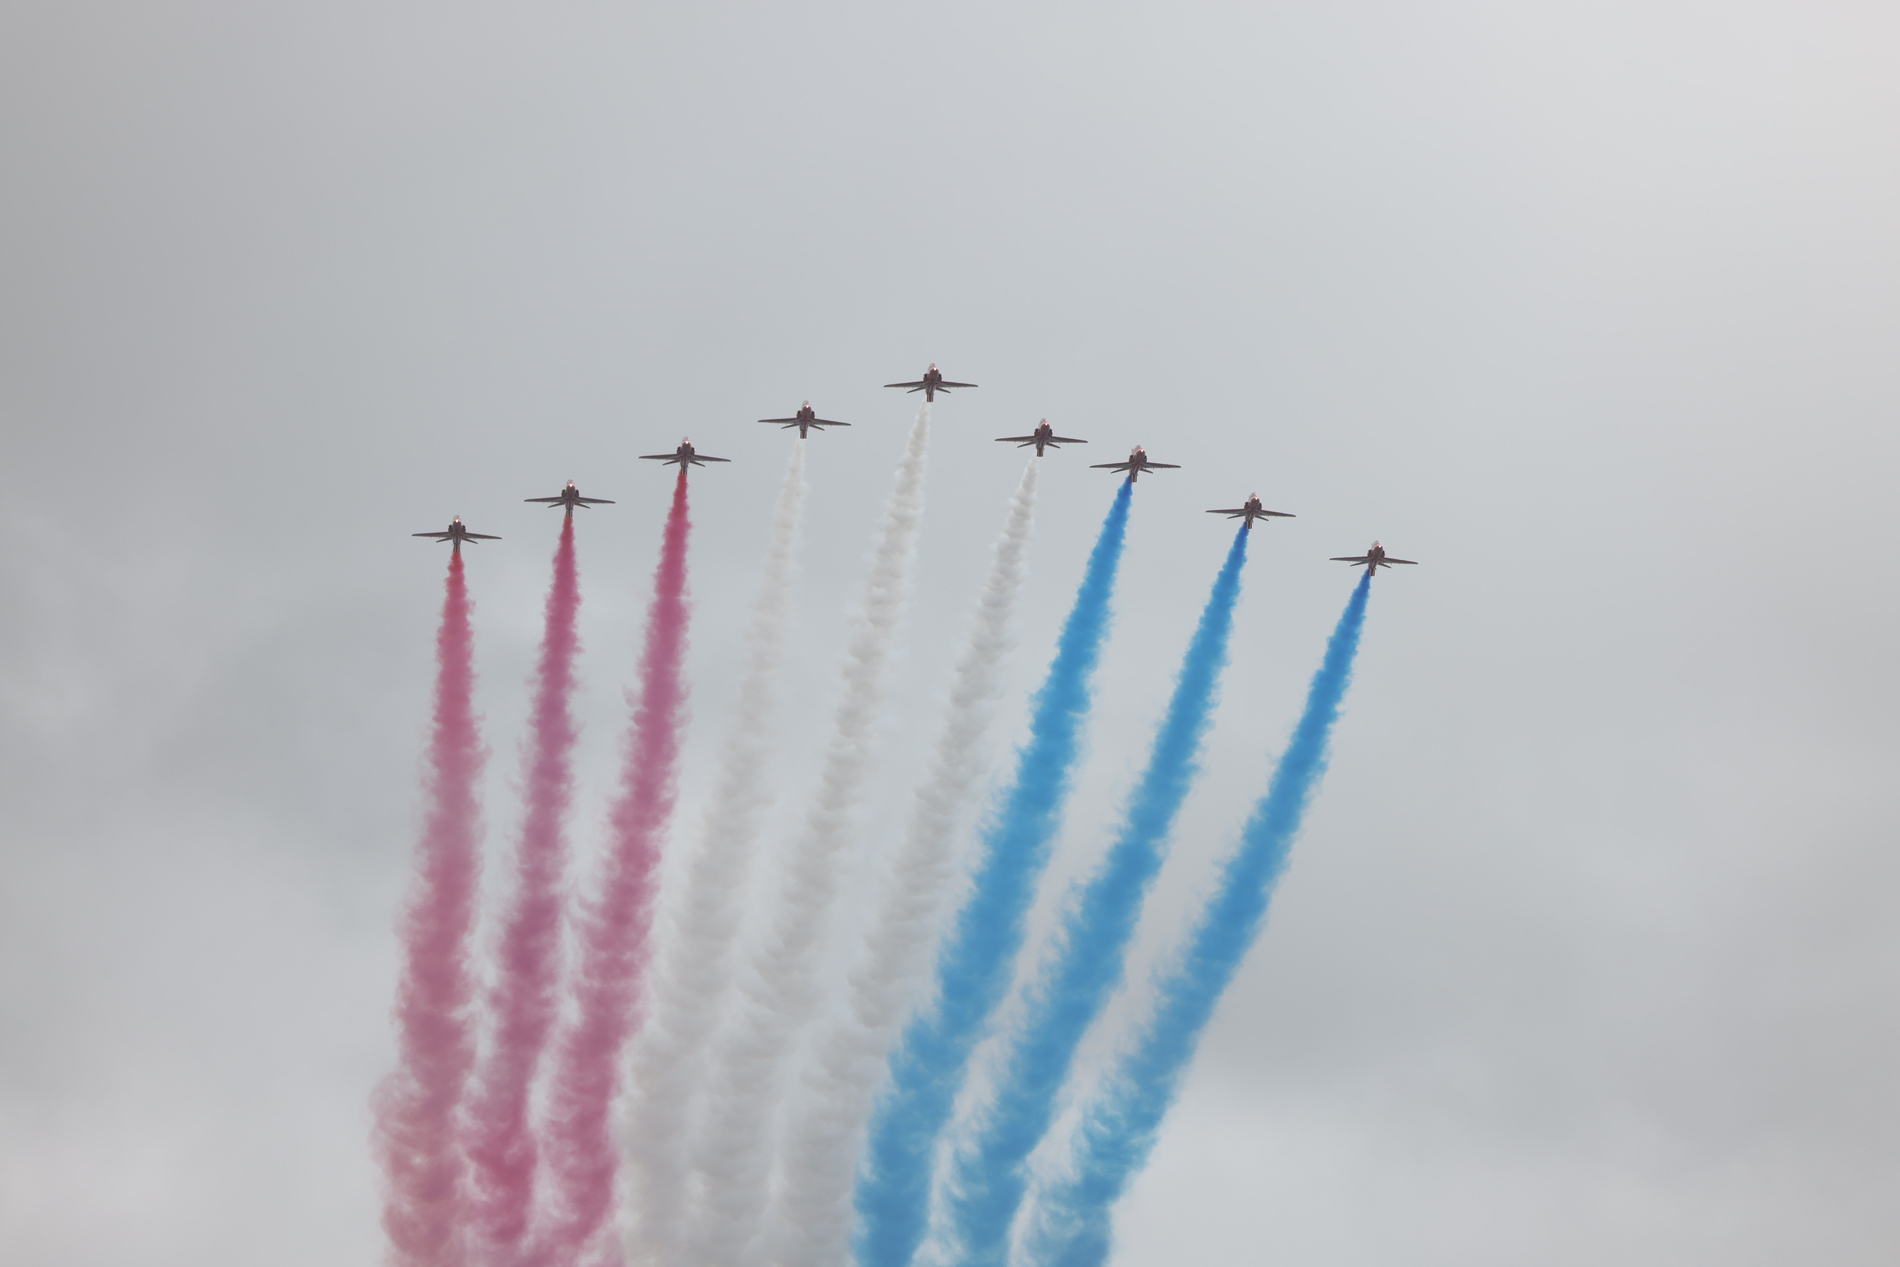 The Red Arrows flying in formation.